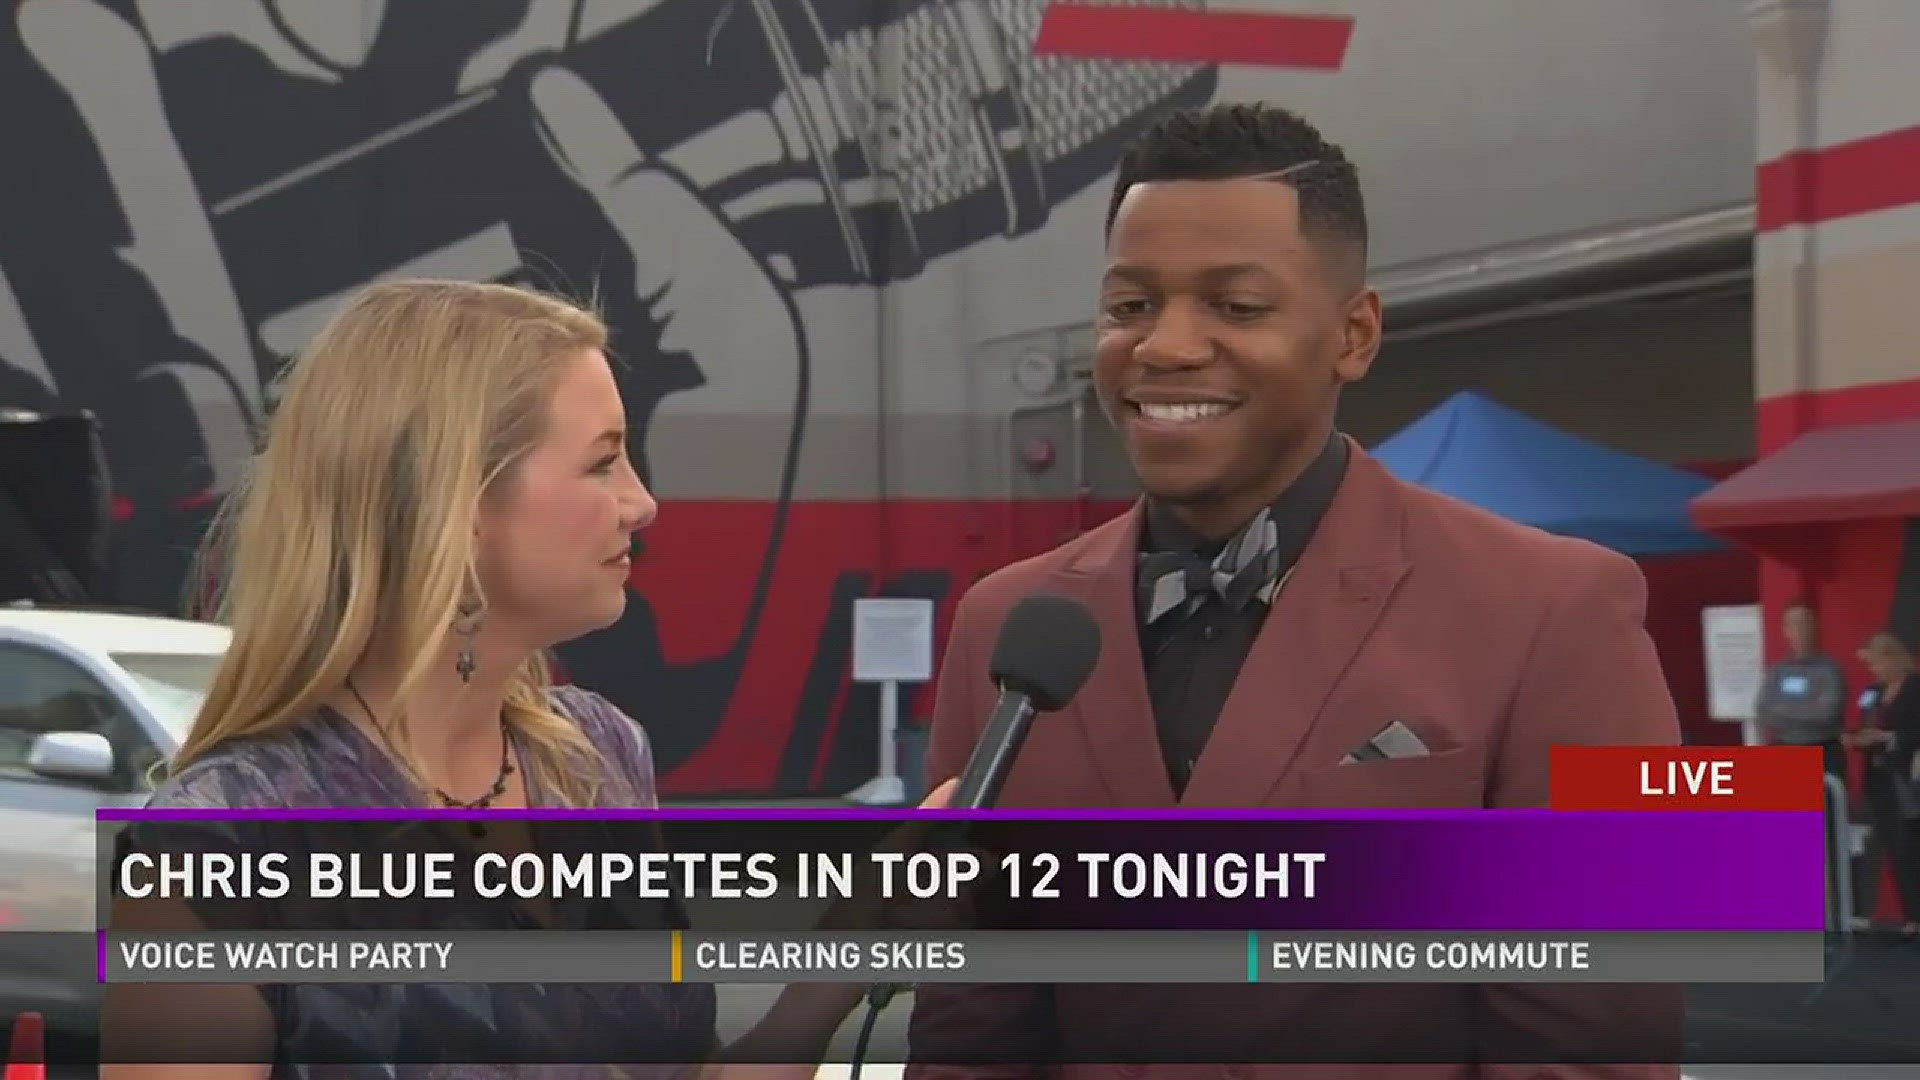 April 24, 2017: A live interview with Chris Blue before he competes in the top 12 round of NBC's The Voice.